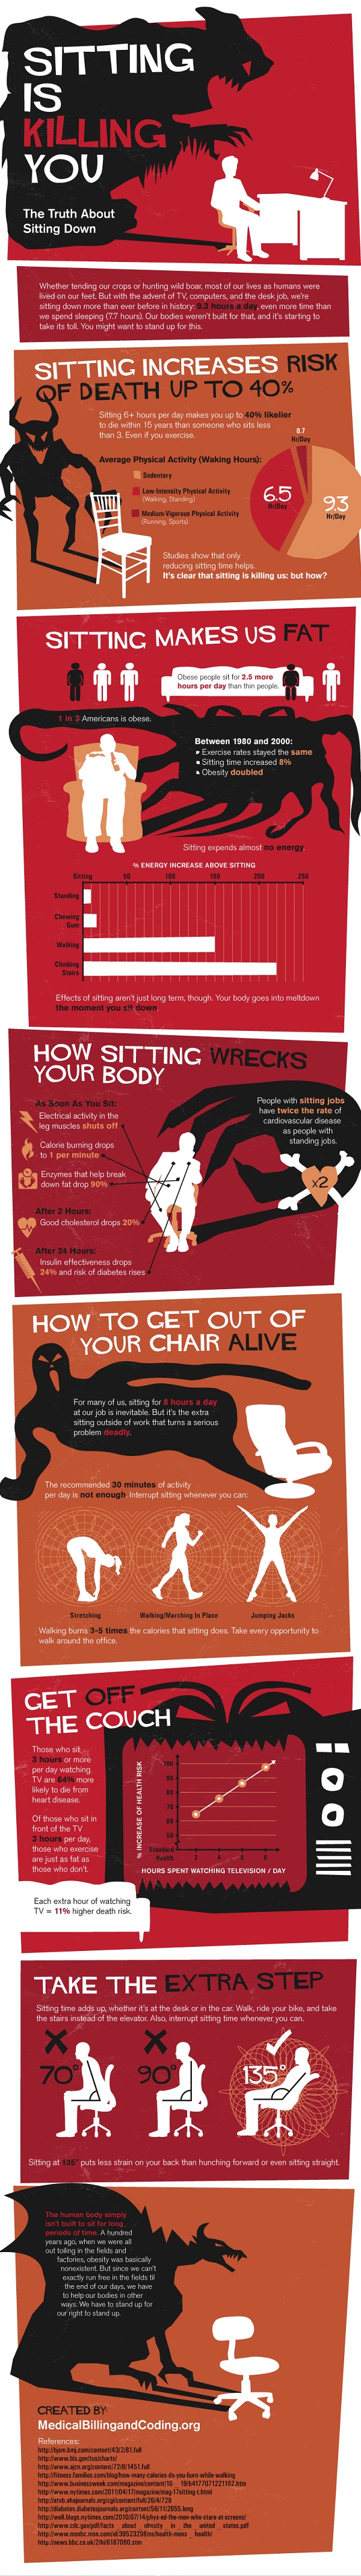 sitting-is-killing-you-infographic-600